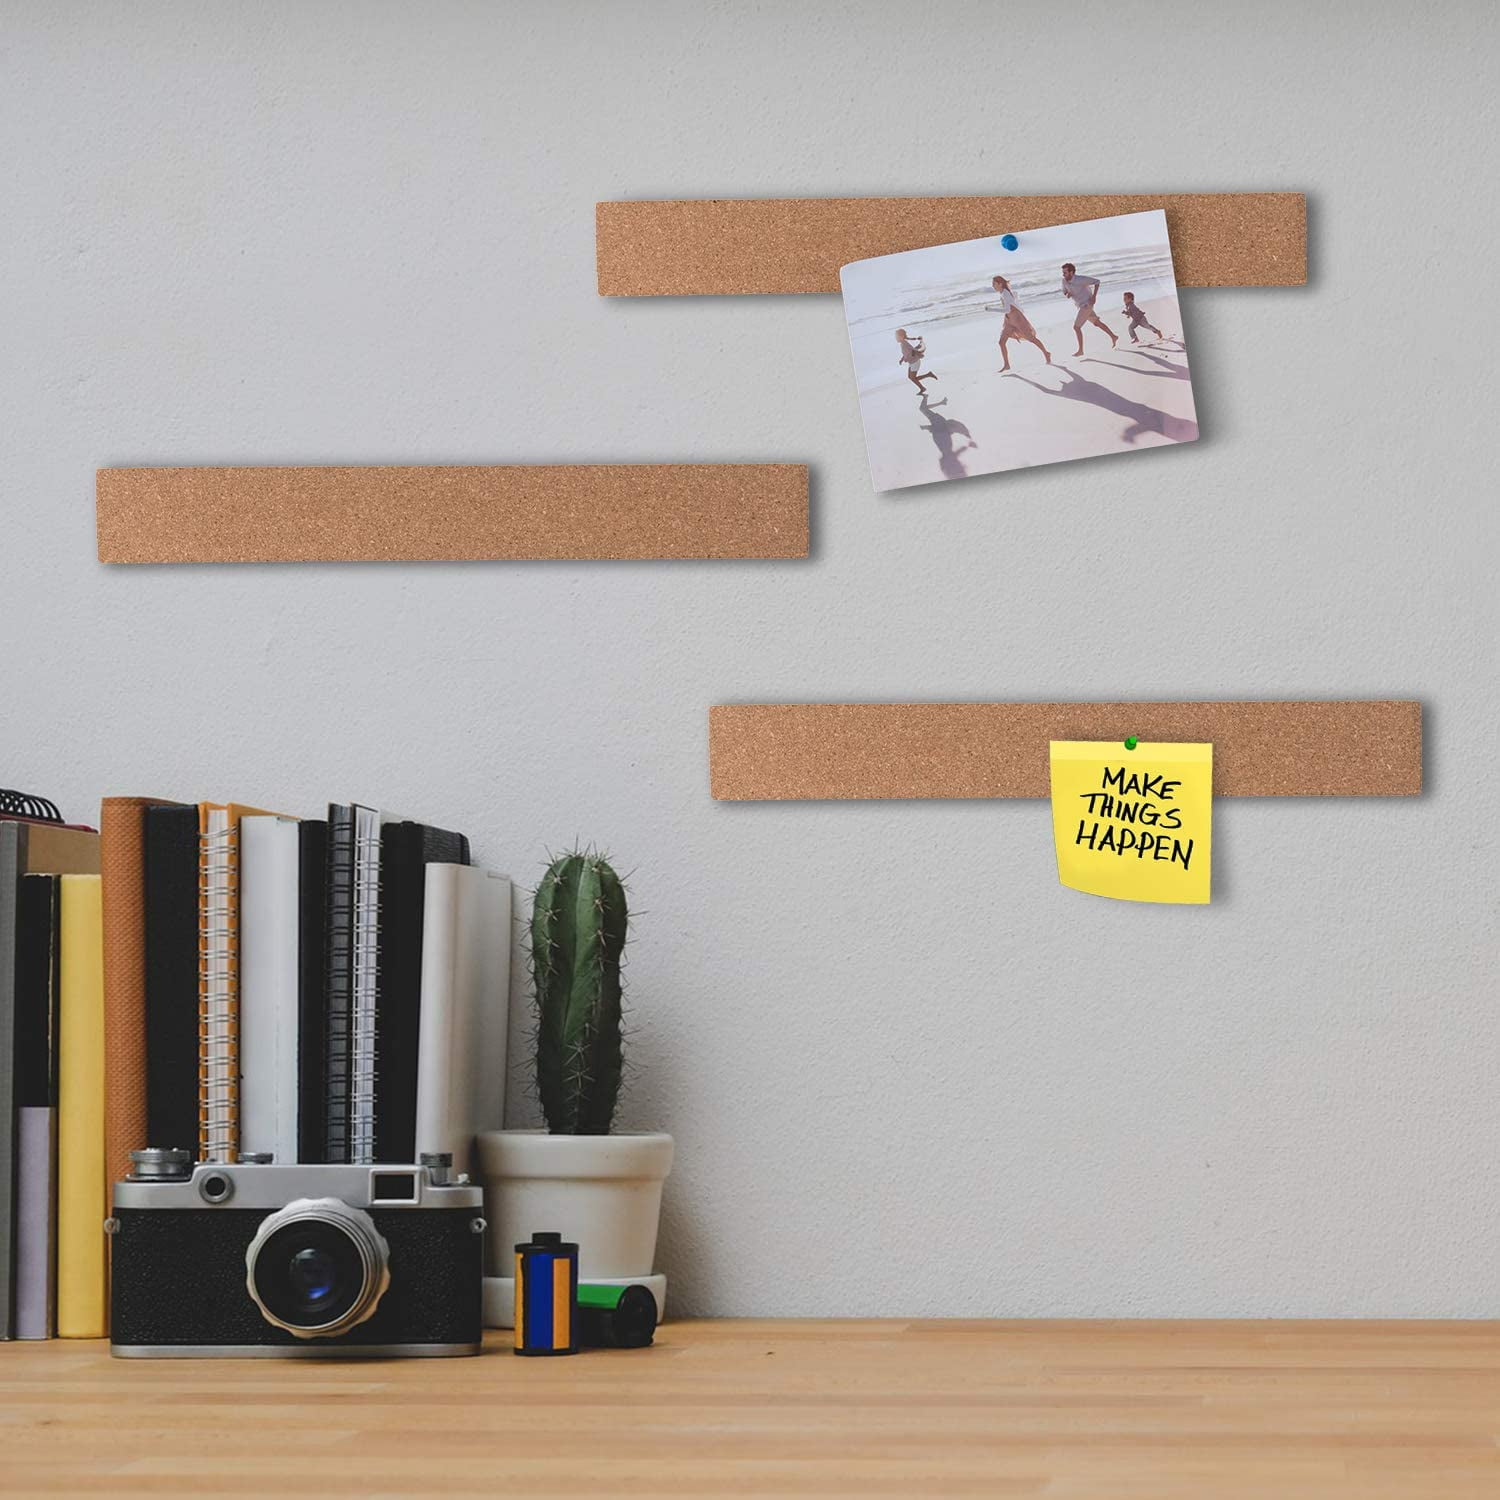 HBlife Cork Board Bulletin Board Bar Strip 15X2 inch - 1/2 inch Thick, 100% Natural Frameless Cork Board Strips with 50 Multi-Color Push Pins